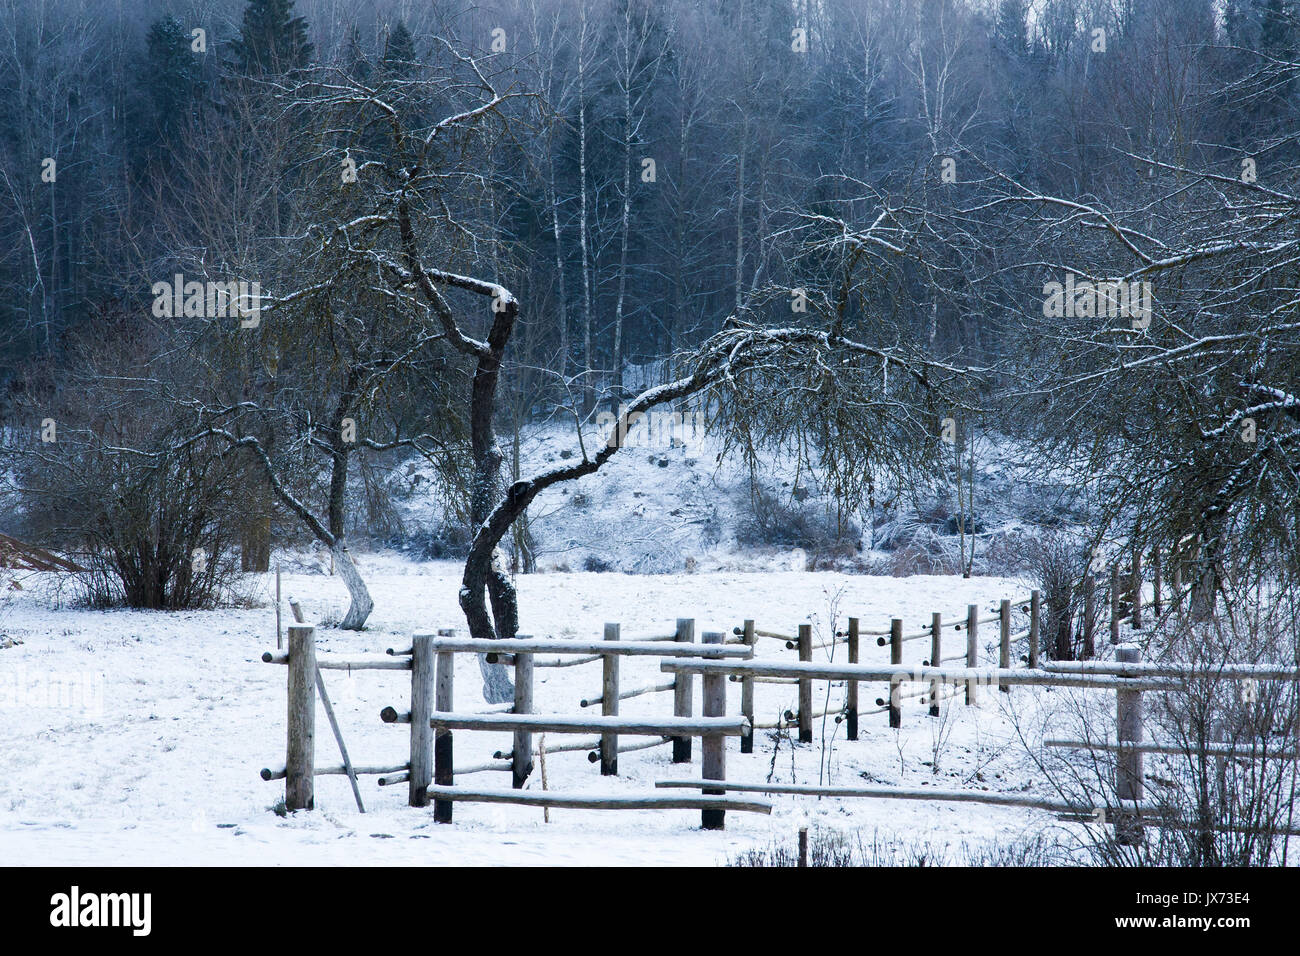 Rural nature season scene: wooden fence in winter forest covered by snow Stock Photo